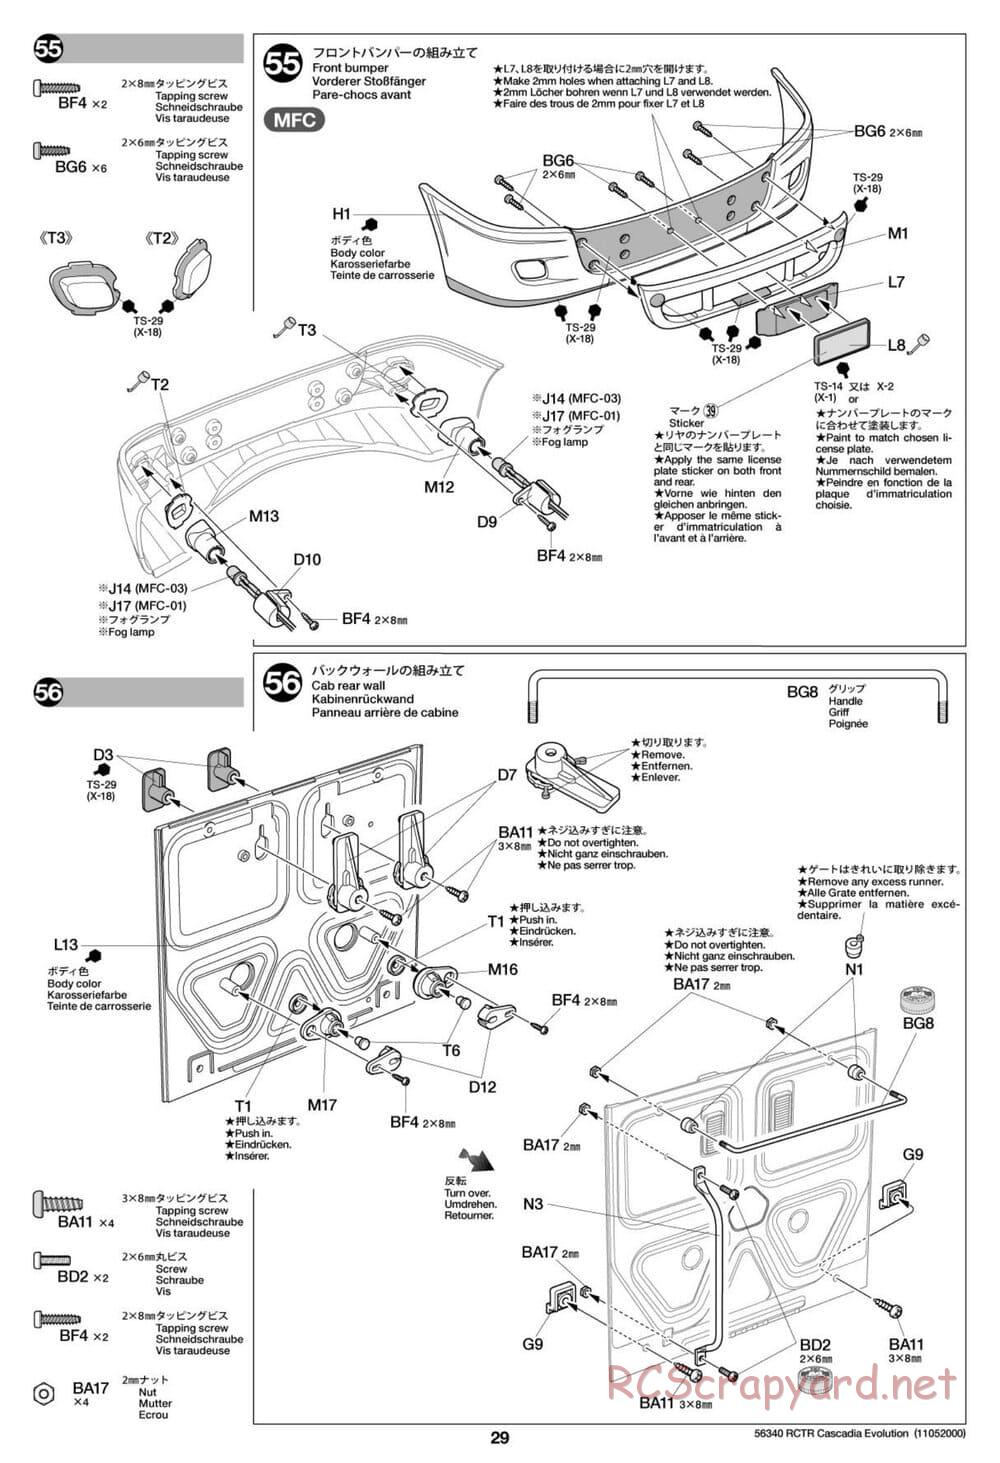 Tamiya - Freightliner Cascadia Evolution Tractor Truck Chassis - Manual - Page 29